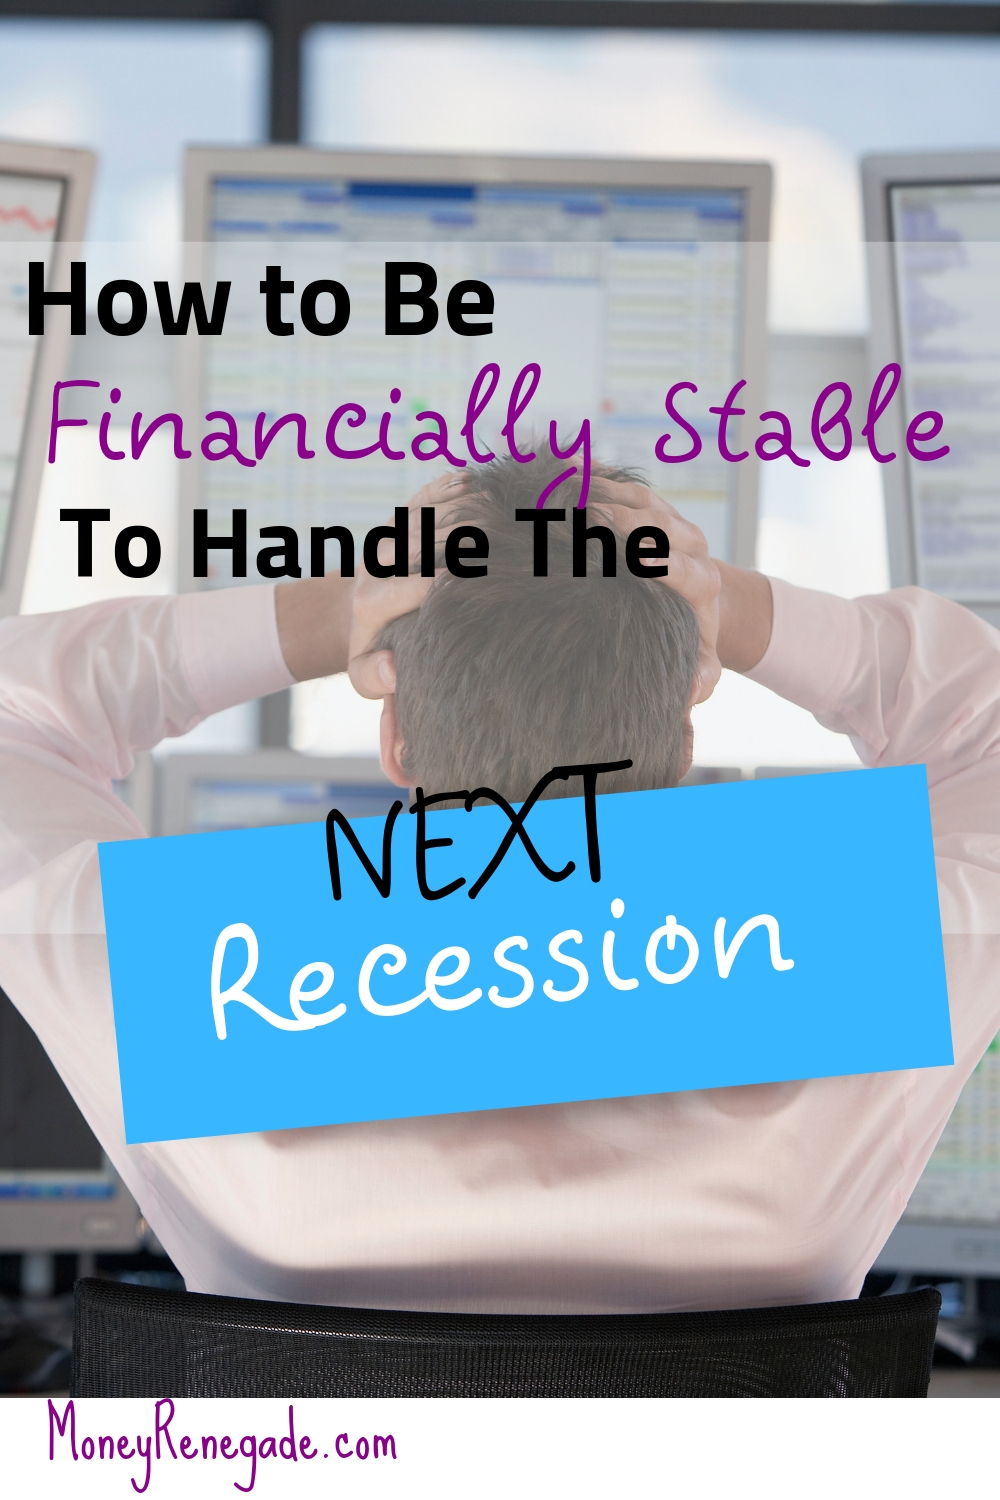 How to Be Financially Stable To Handle The Next Recession